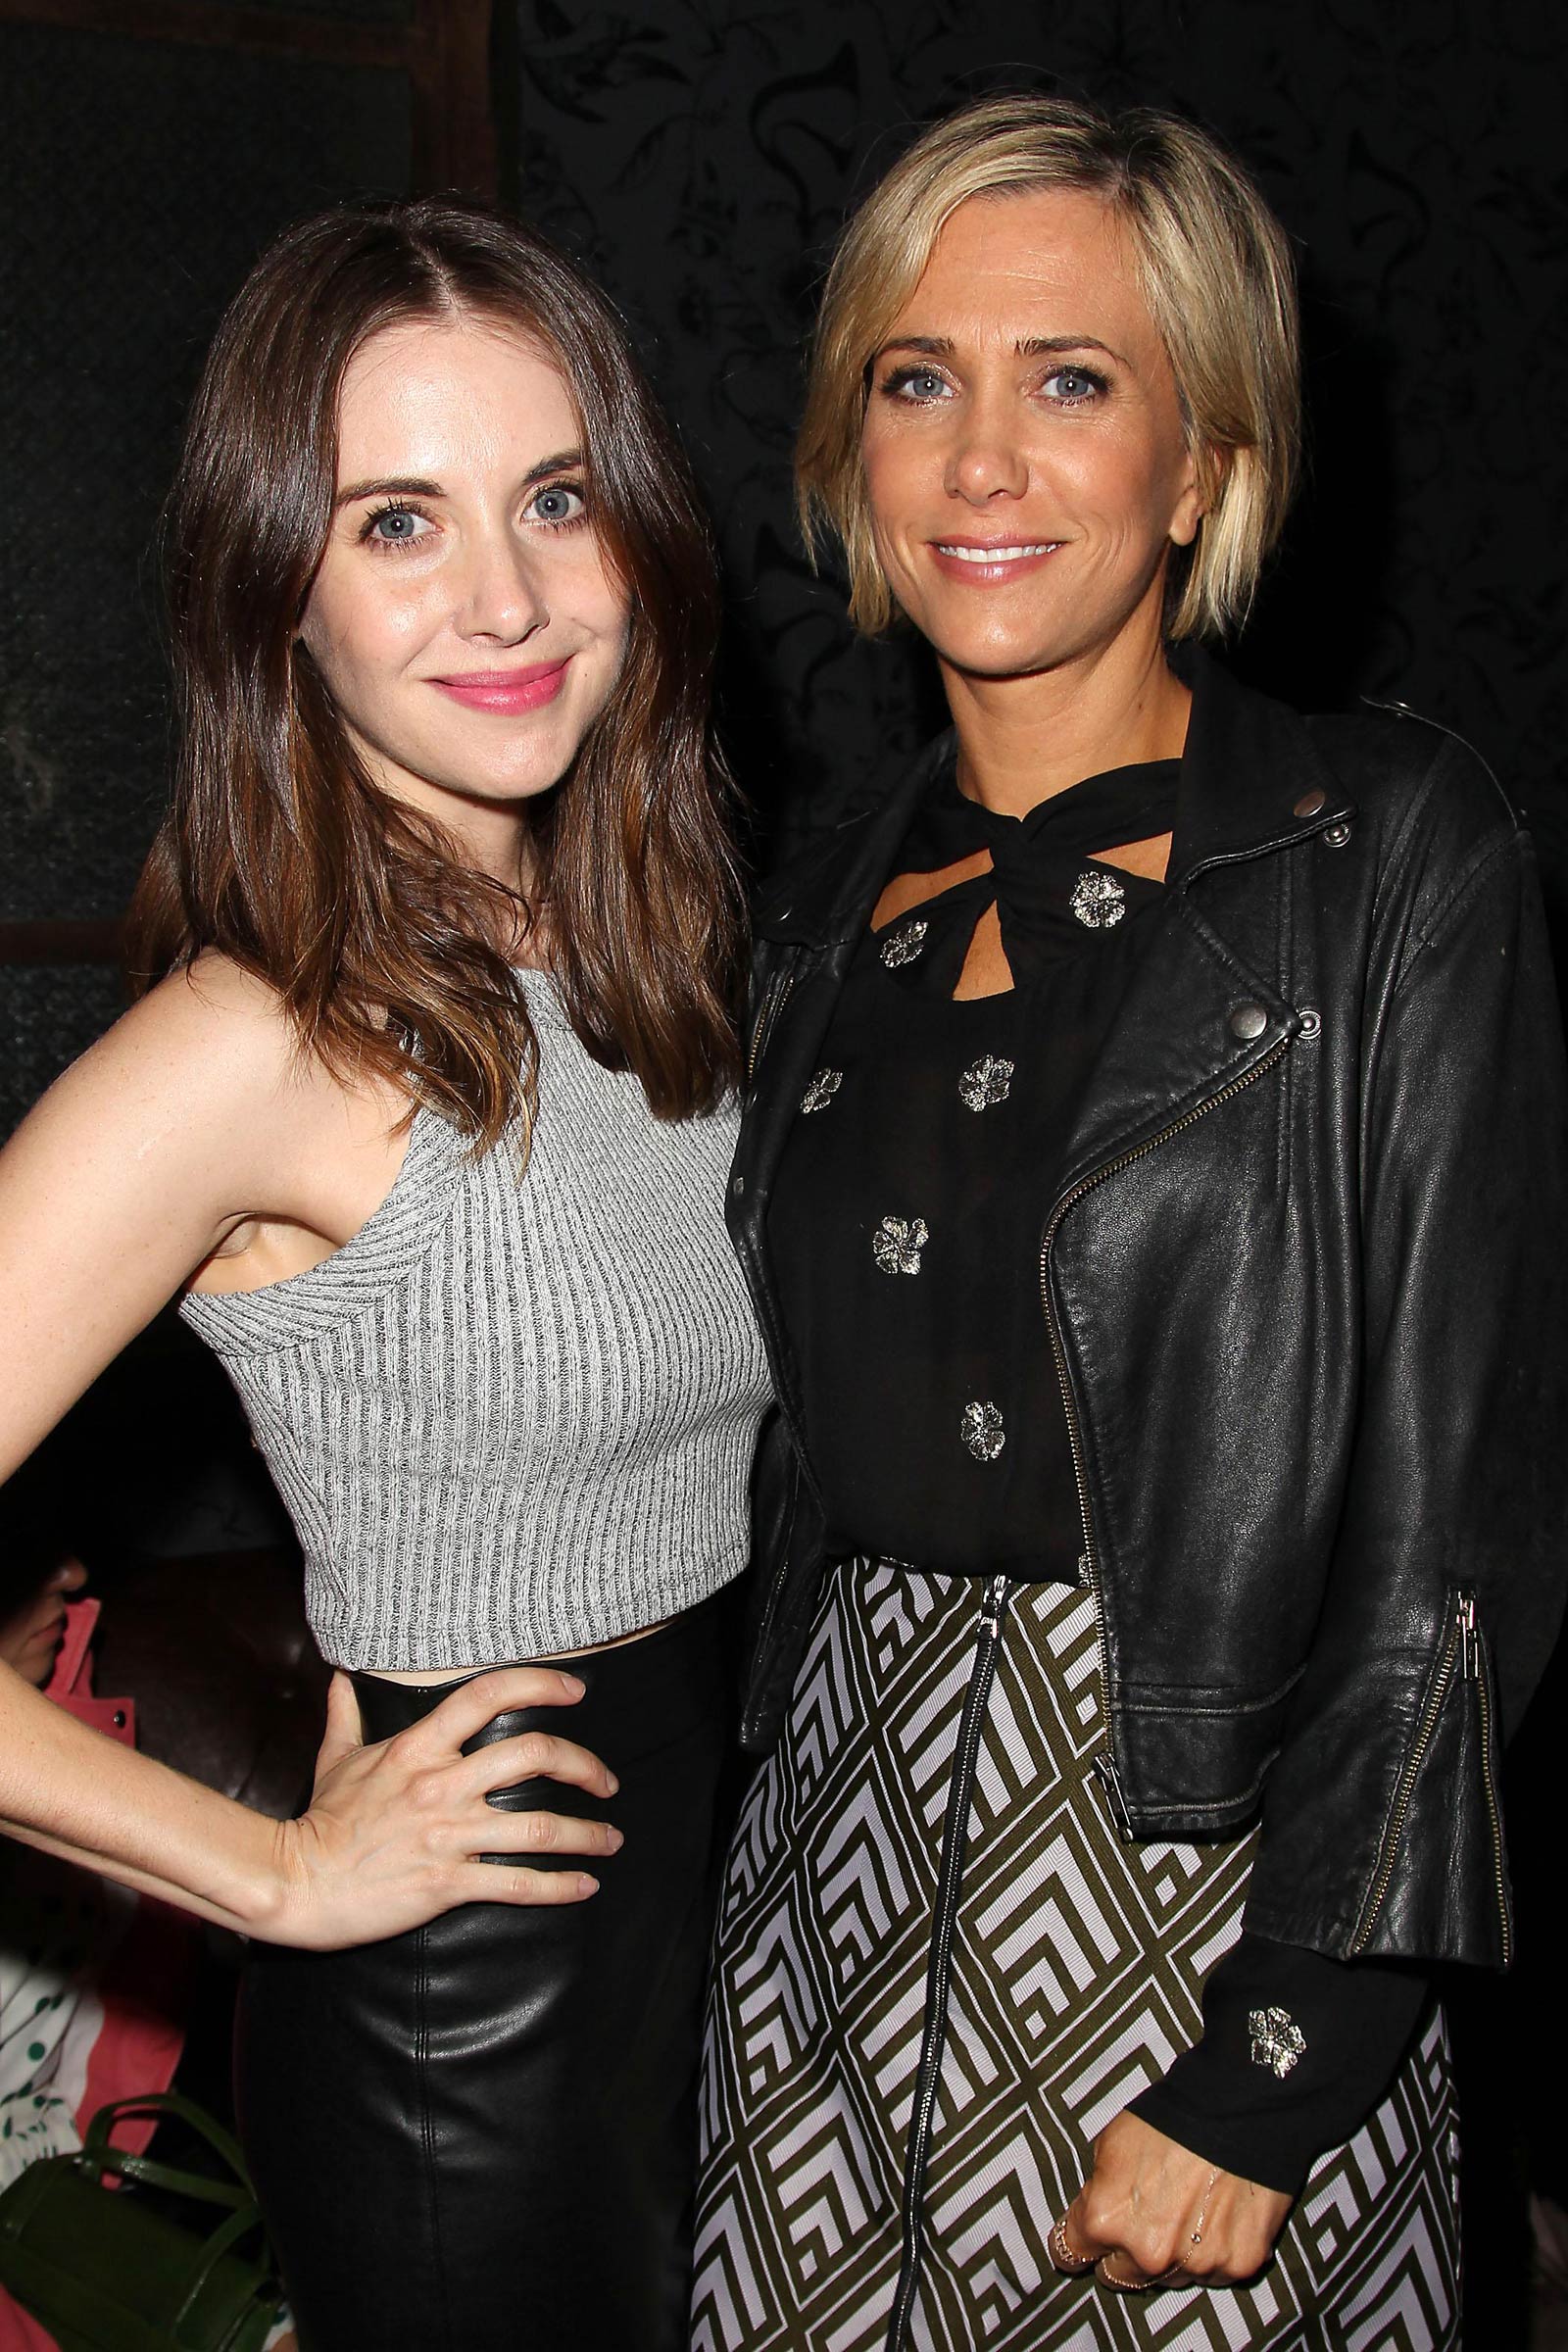 Alison Brie attends Welcome To Me afterparty